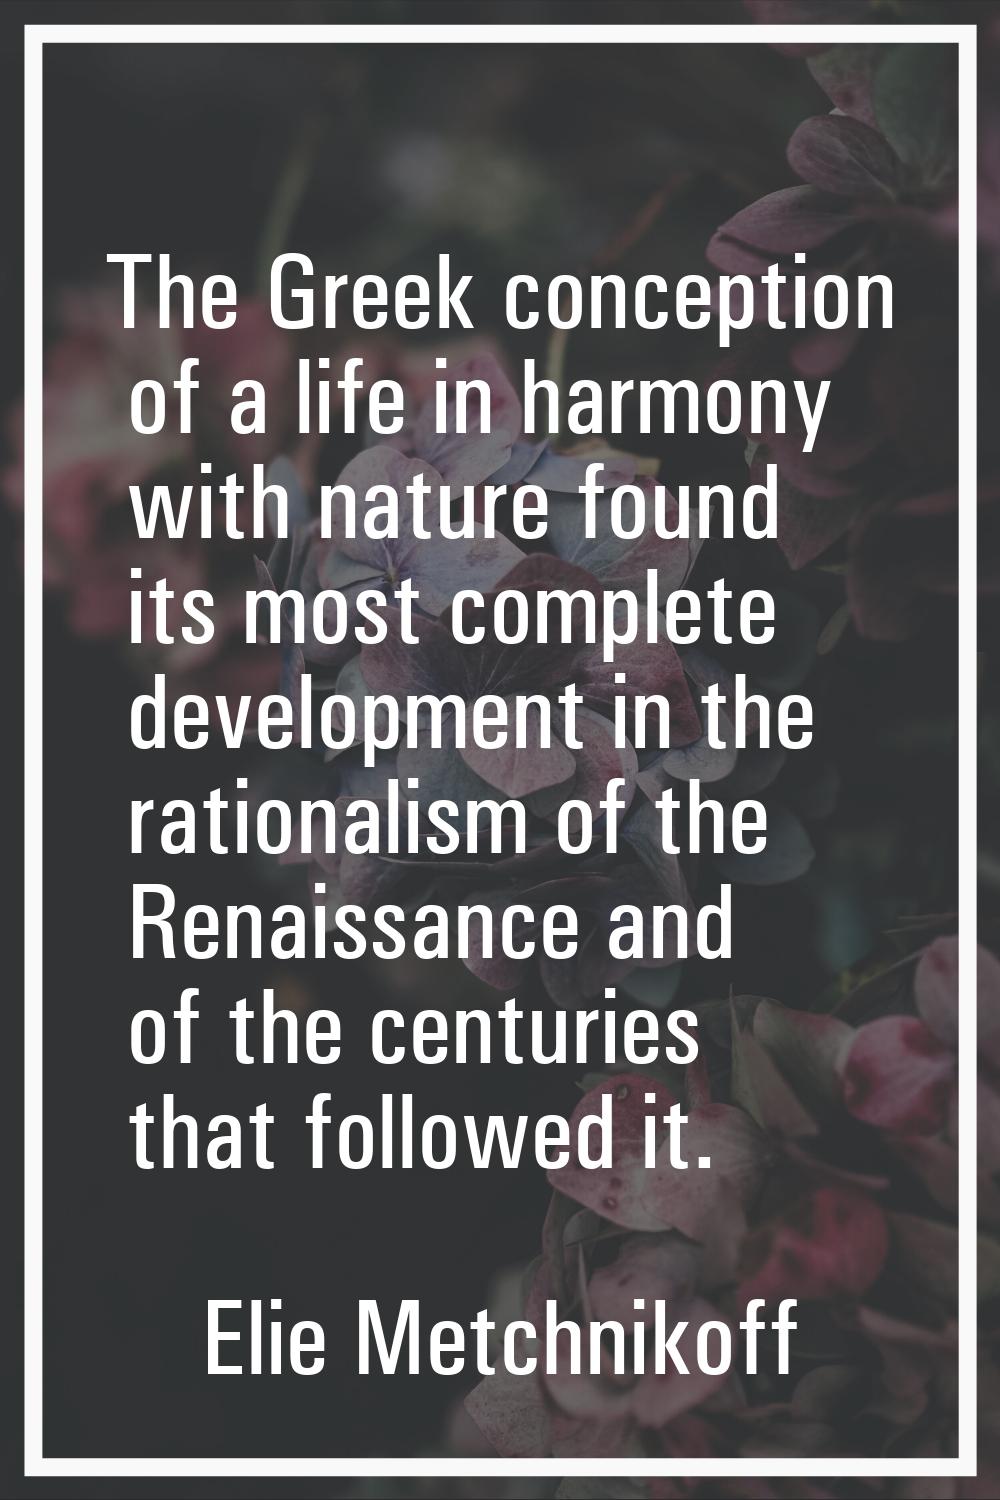 The Greek conception of a life in harmony with nature found its most complete development in the ra